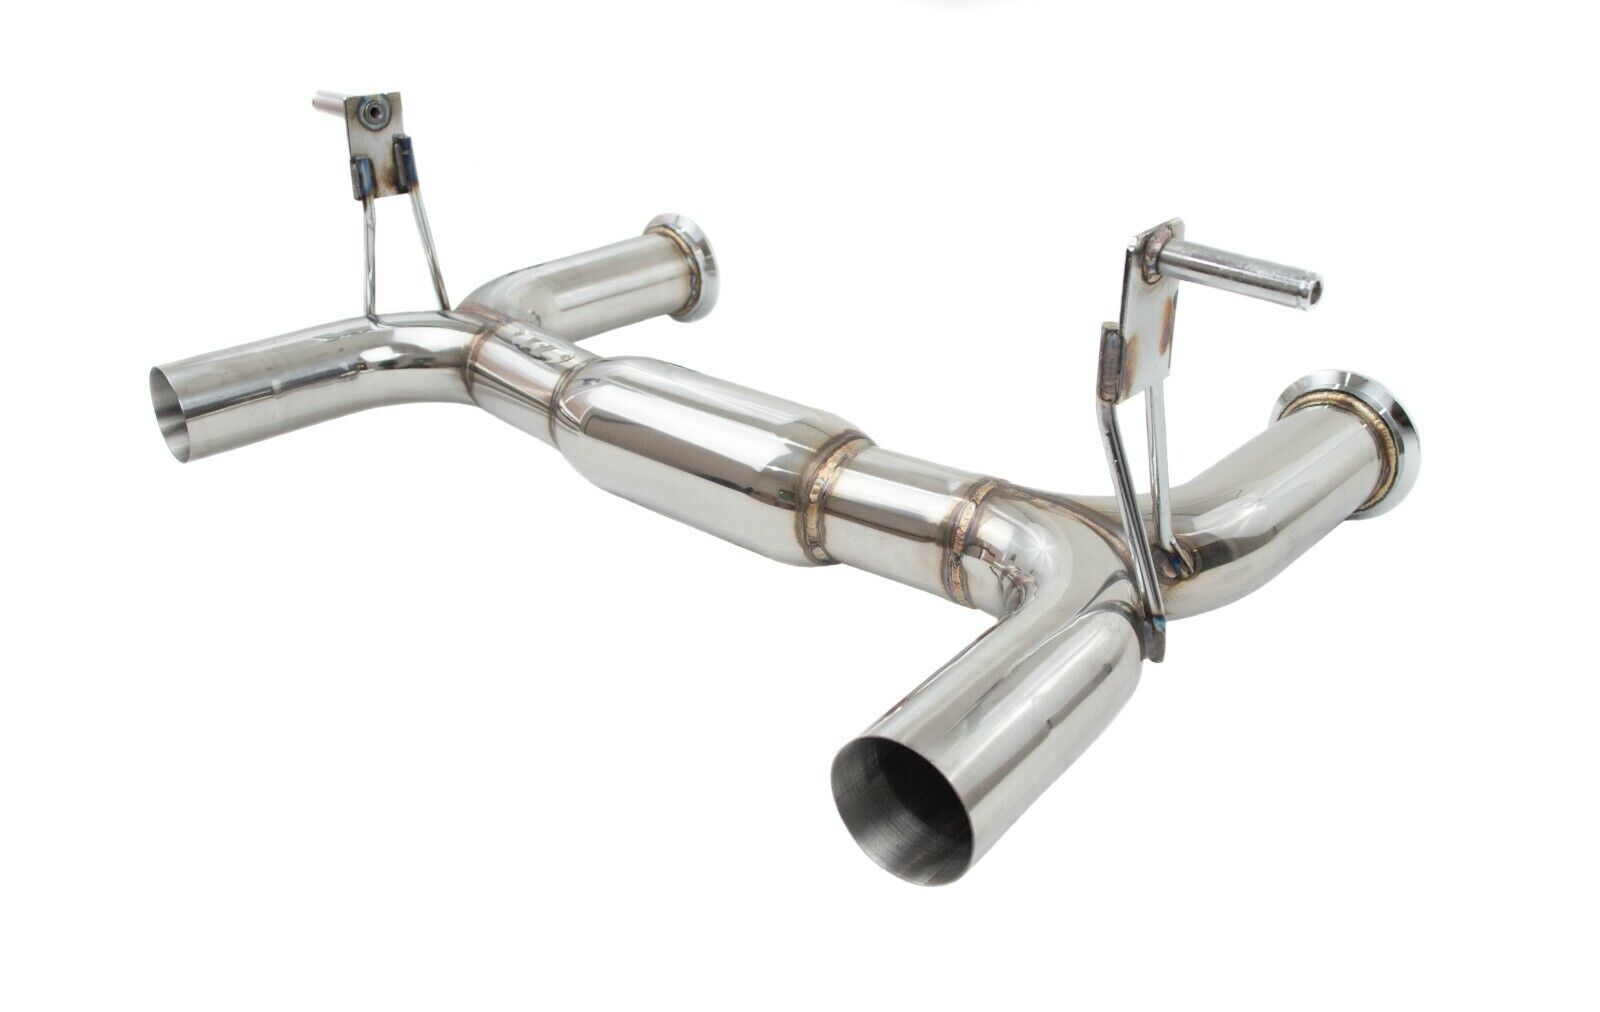 Fits Lamborghini Huracan EVO / Performante TOP SPEED PRO-1 X-Pipe Exhaust System